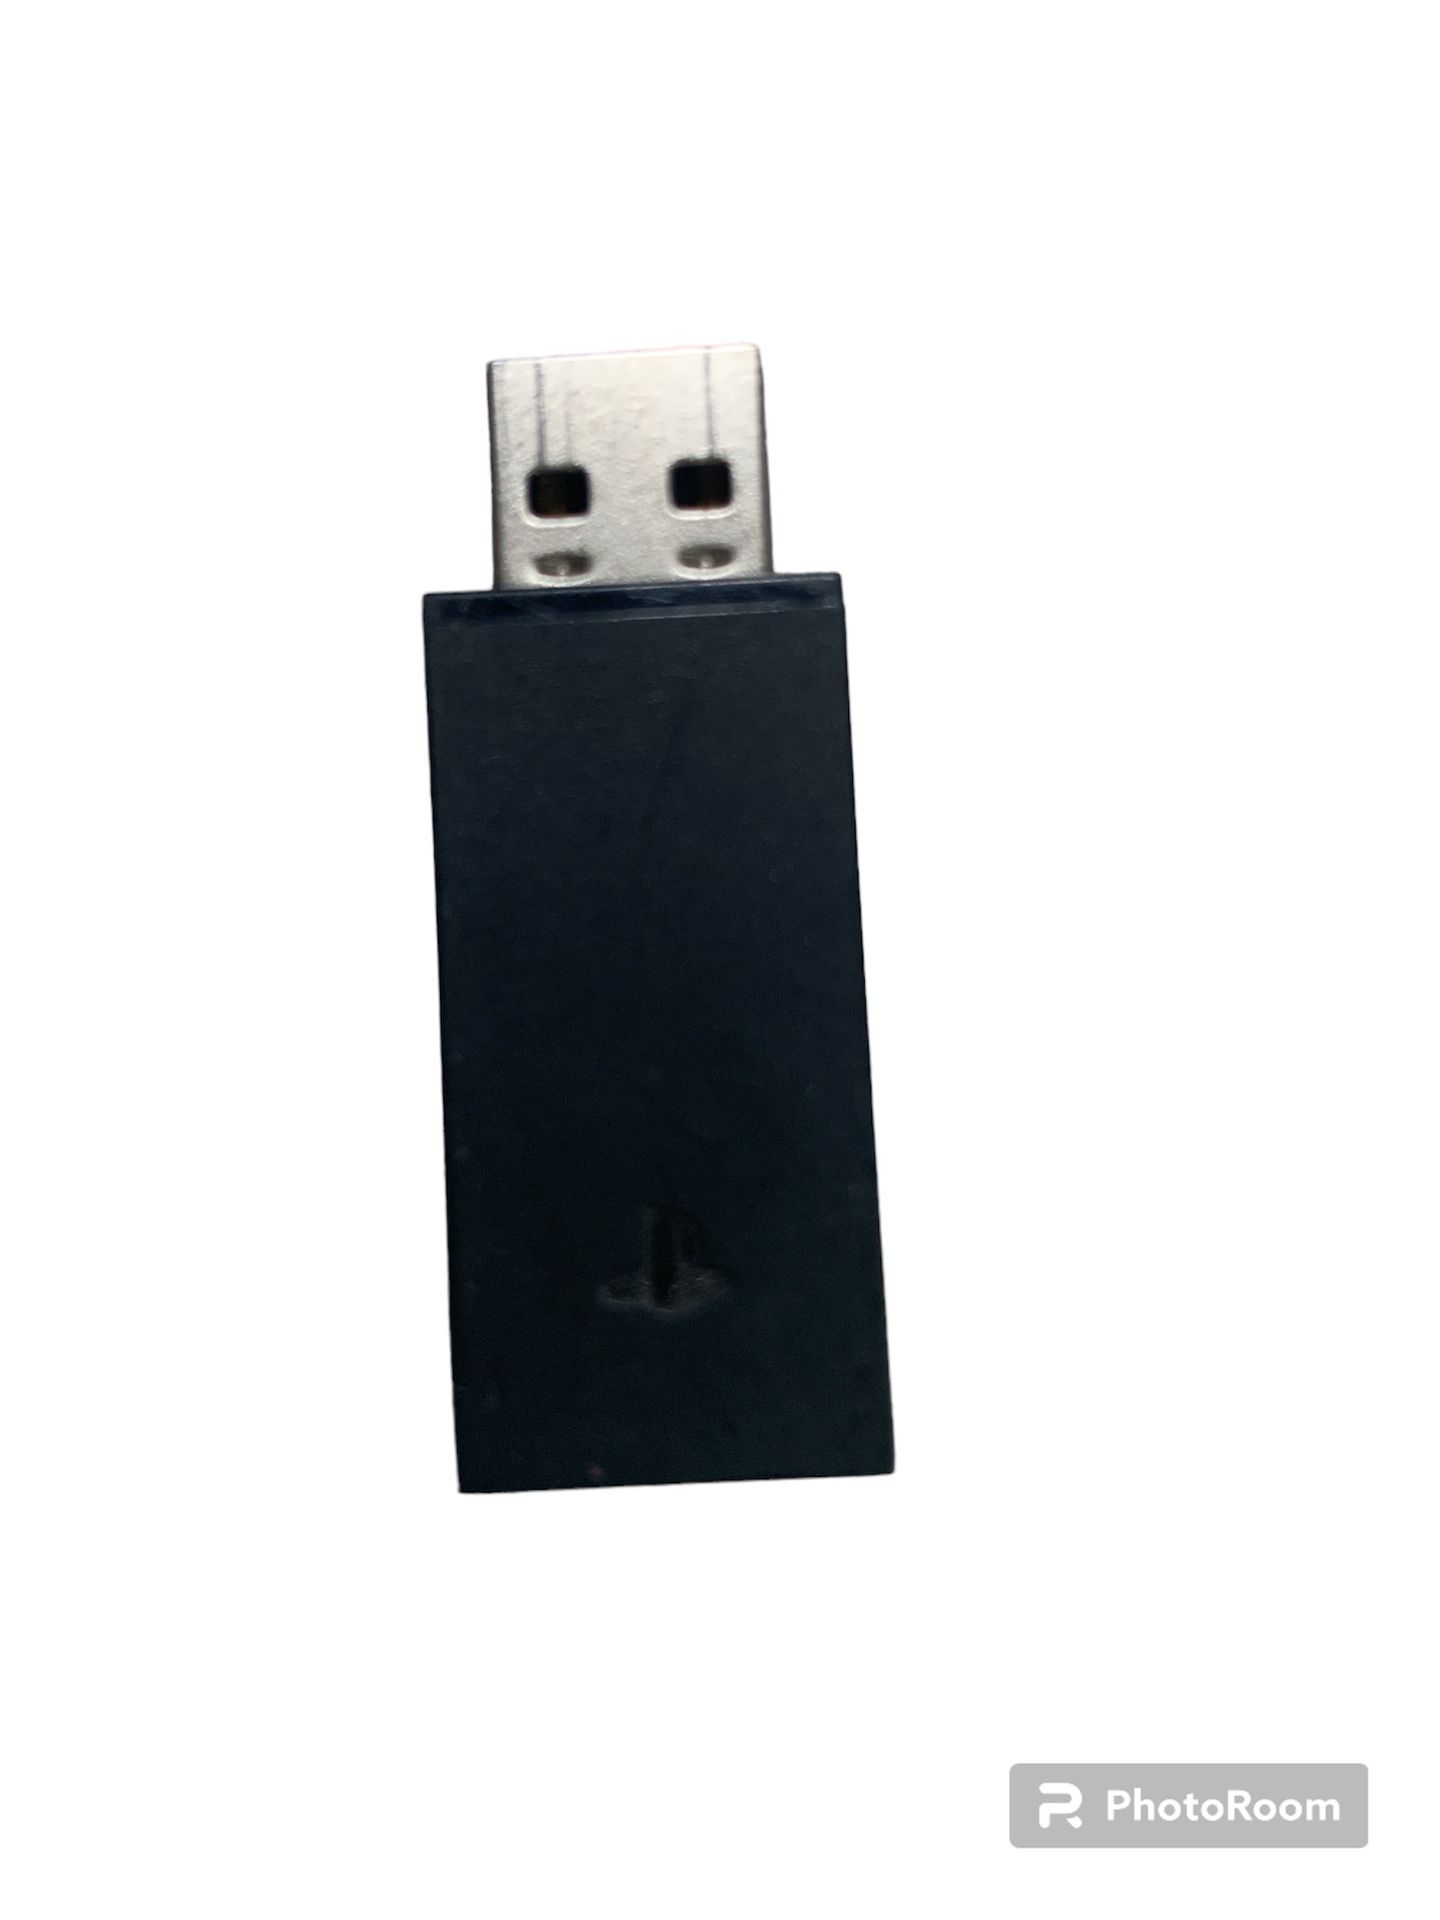 PlayStation Wireless USB Dongle Adapter CECHYA-0082 for Gold Headset PS4